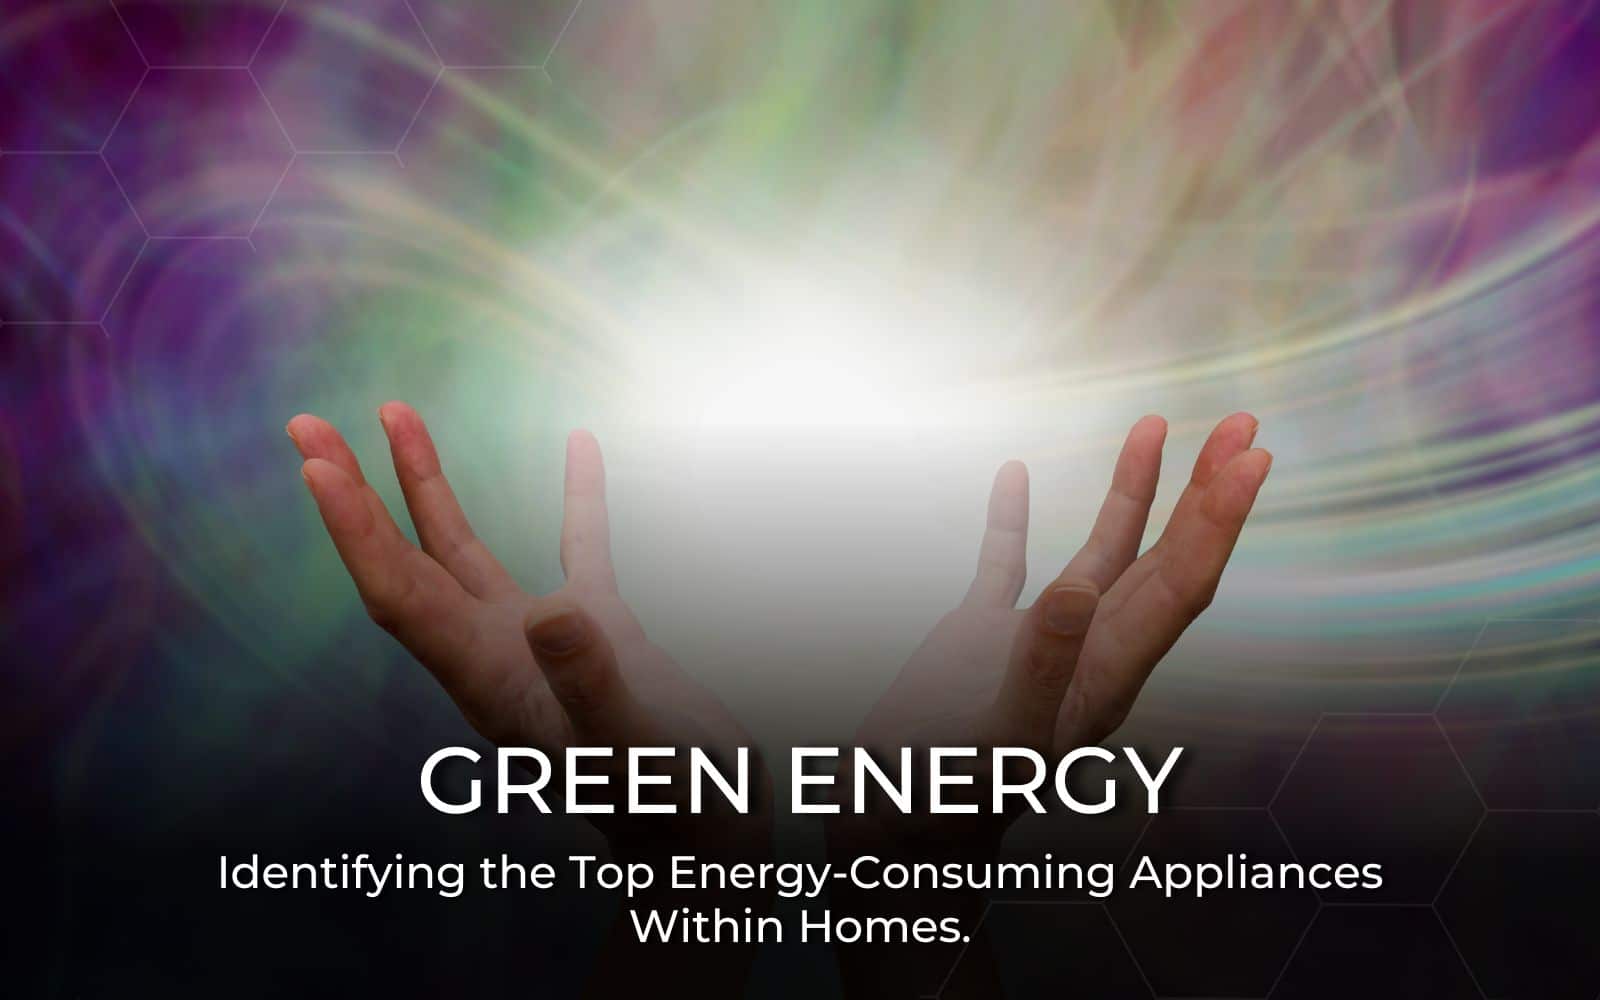 The Top Energy Consuming Appliances Within Homes